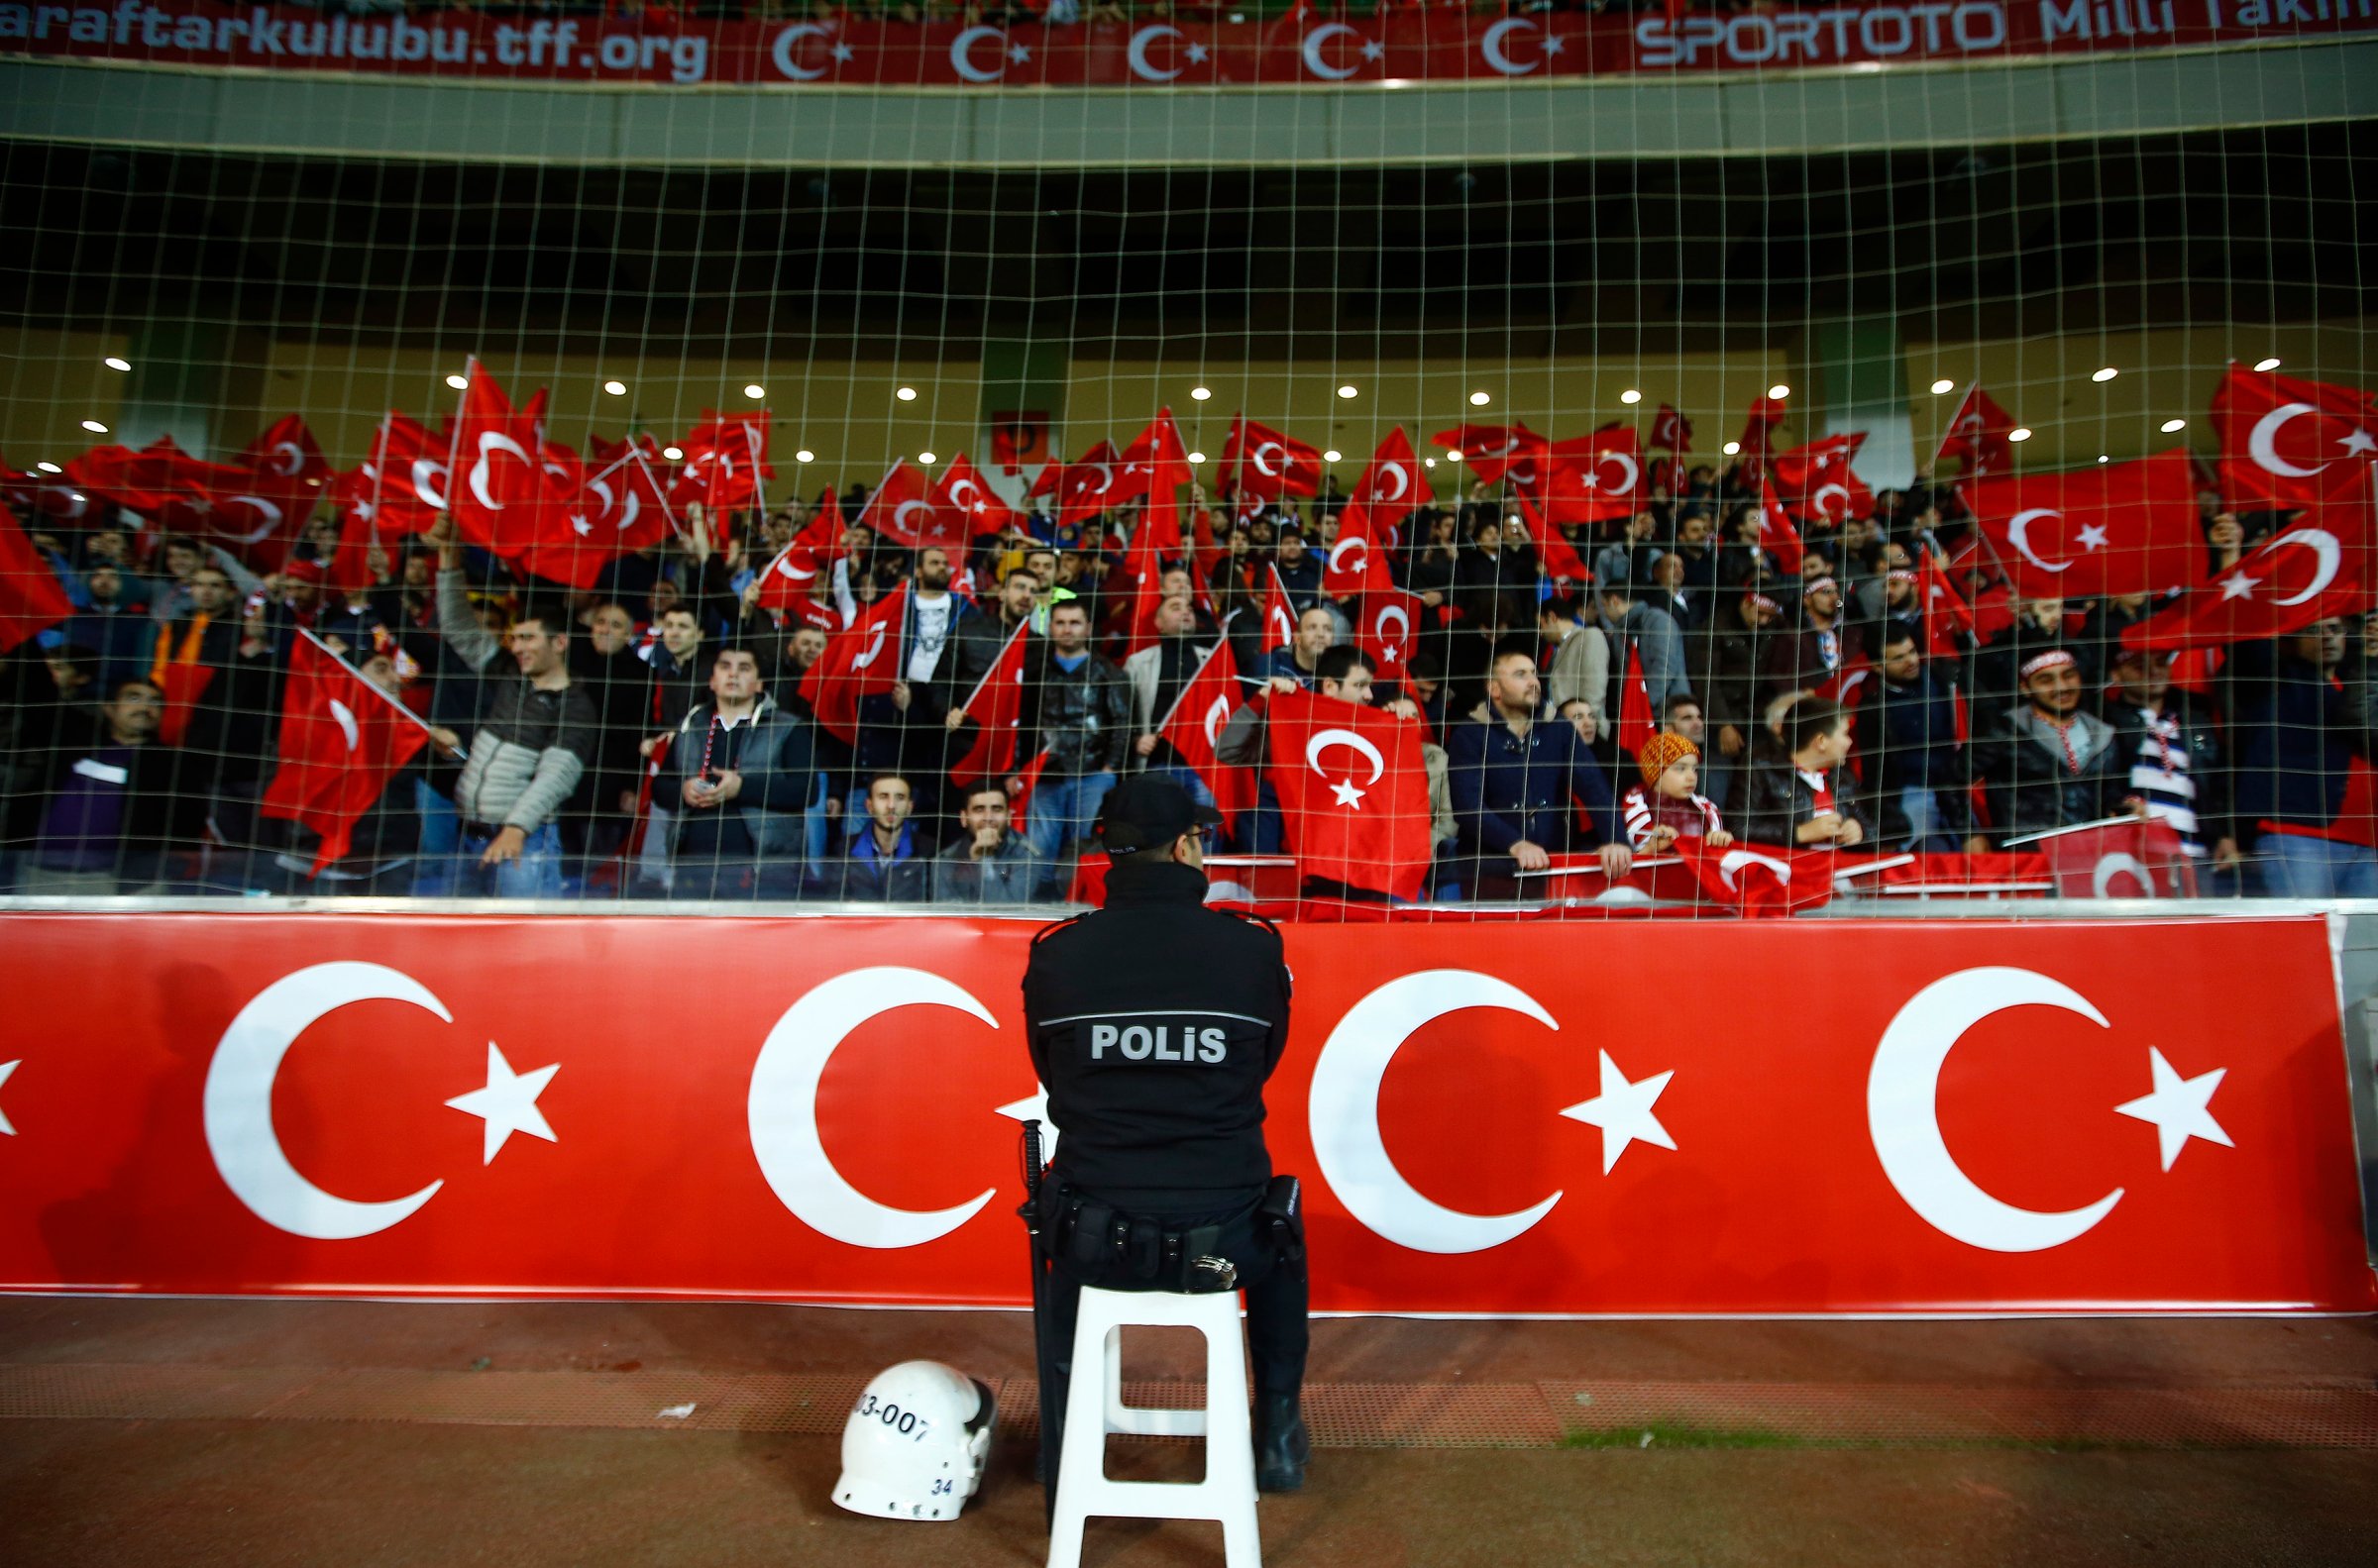 Policeman stands guard in front of supporters of Turkey during their international friendly soccer match against Greece at Basaksehir Fatih Terim stadium in Istanbul